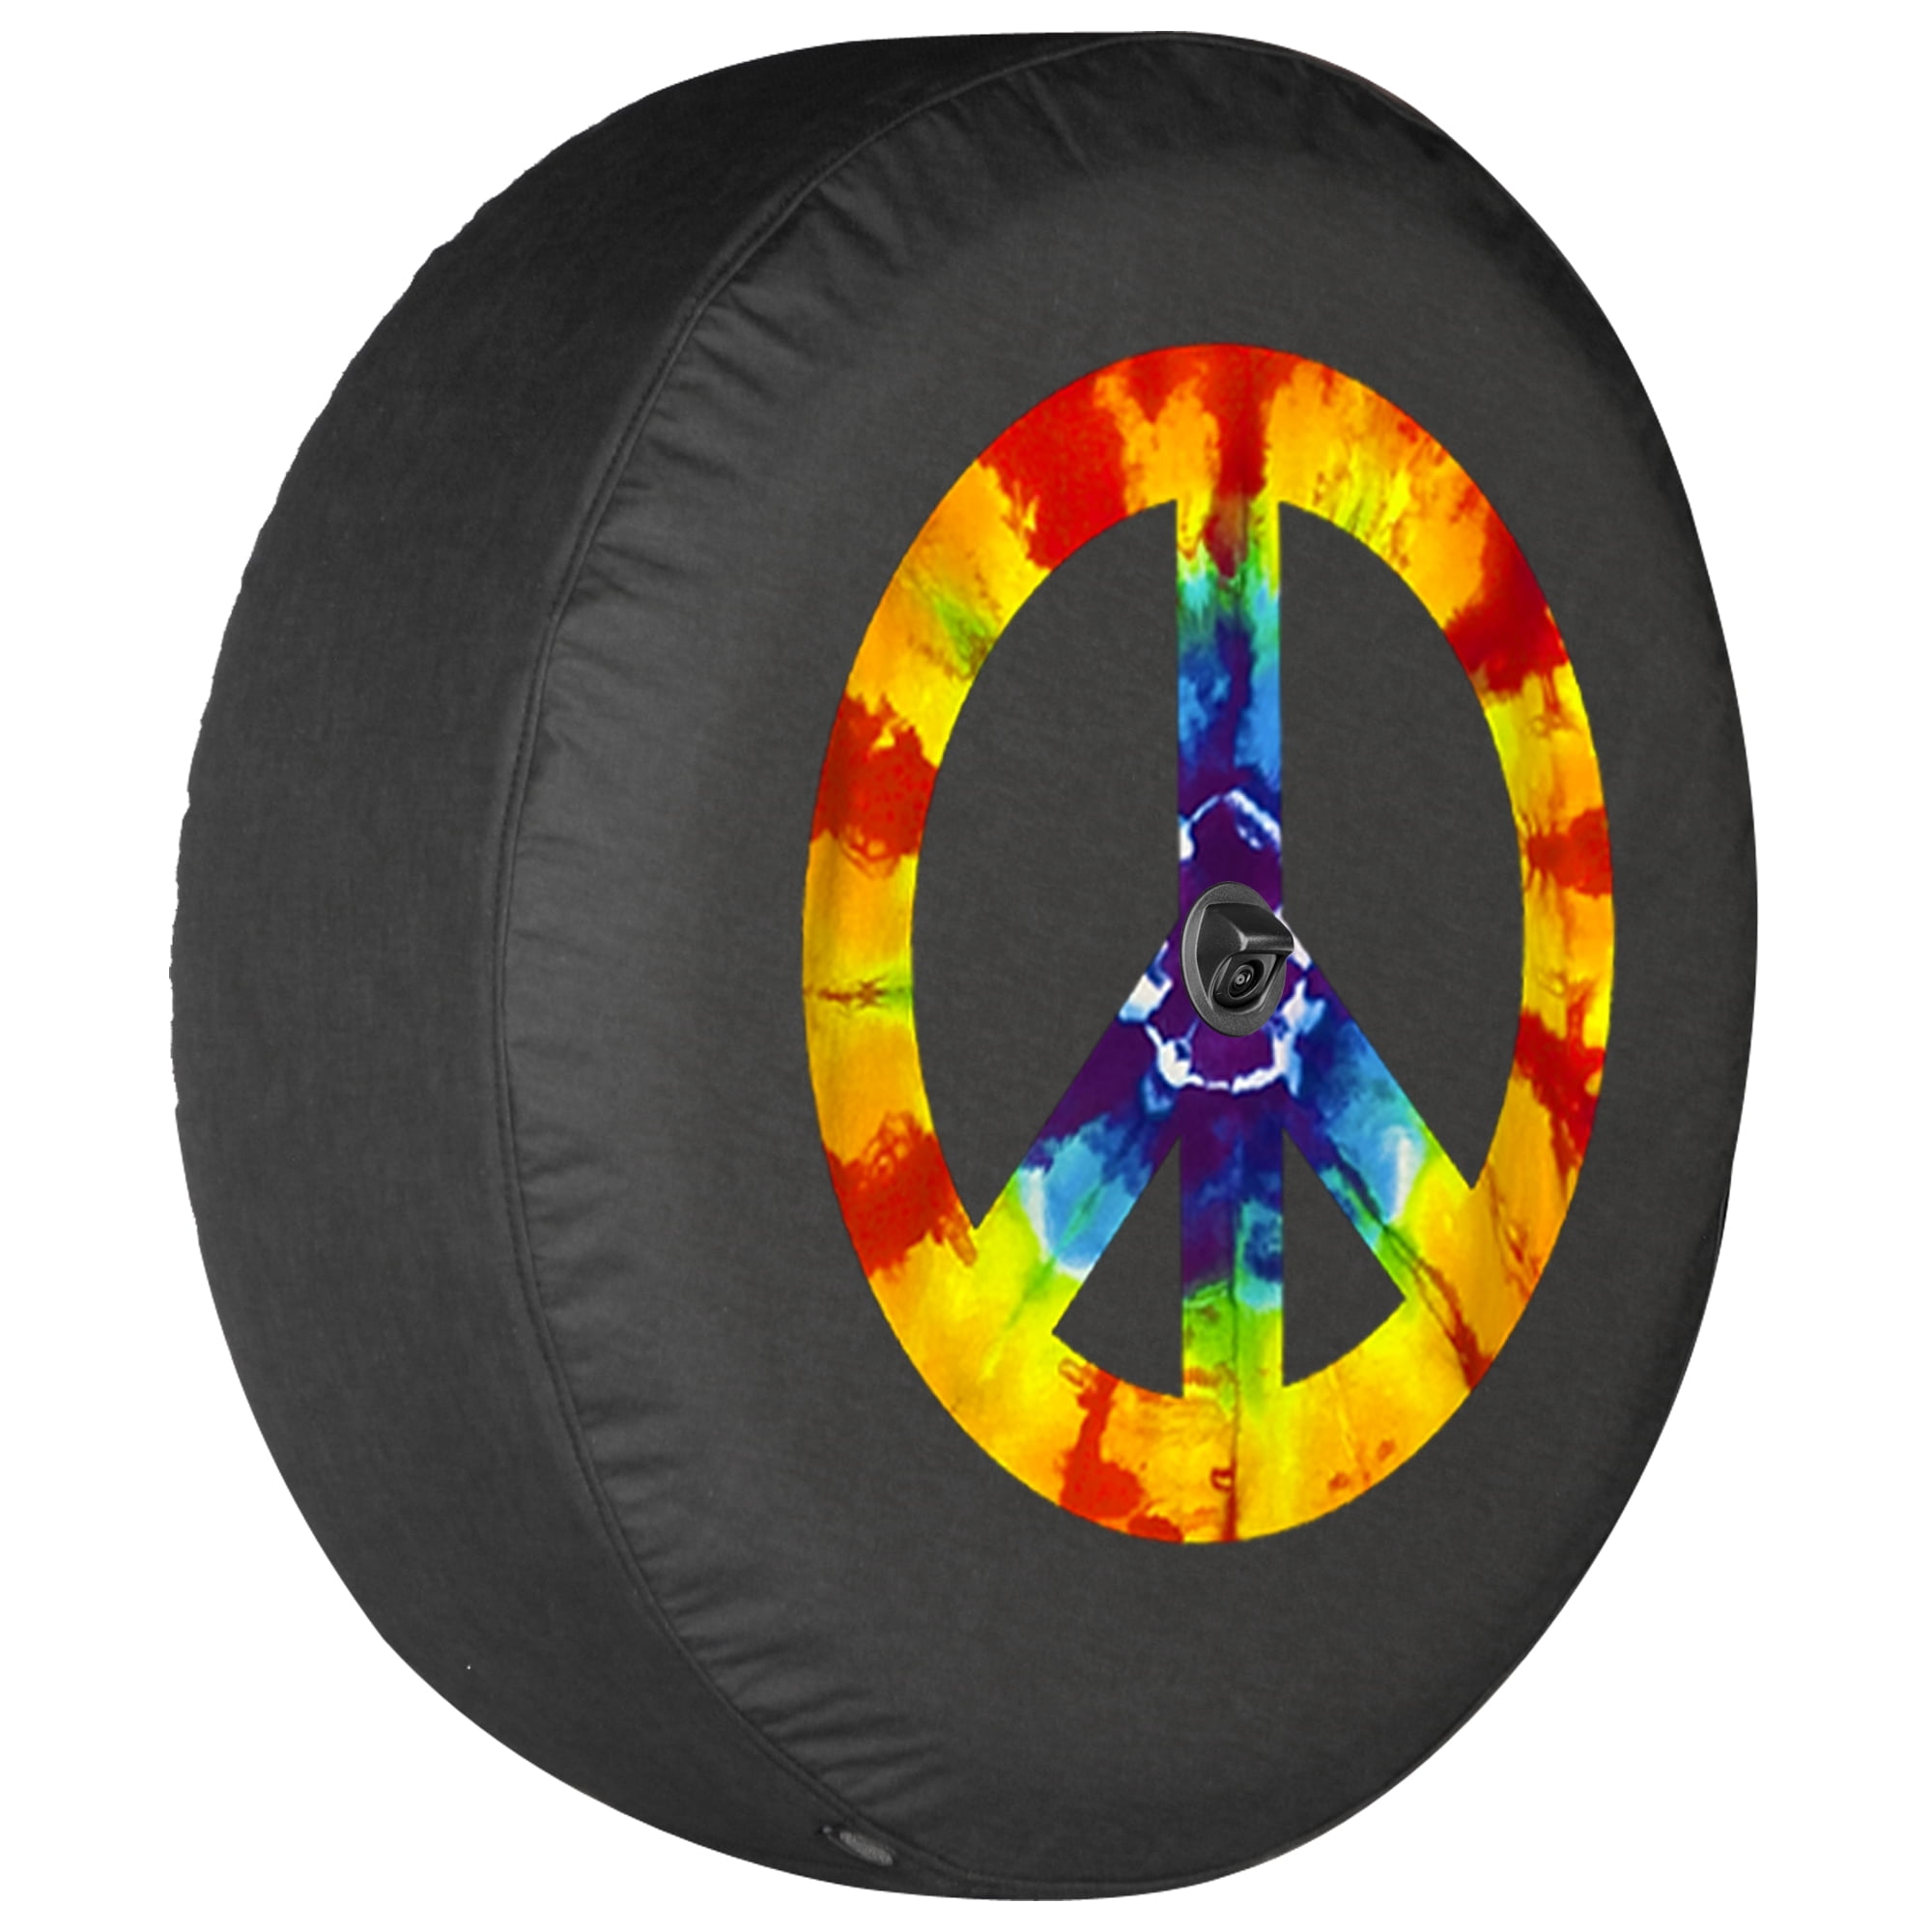 Im Into Fitness Fitness Boob Spare Tire Cover Universal Fit for Jeep Rvs Trucks Cars Trailer 14 15 16 17 inch Wheel 